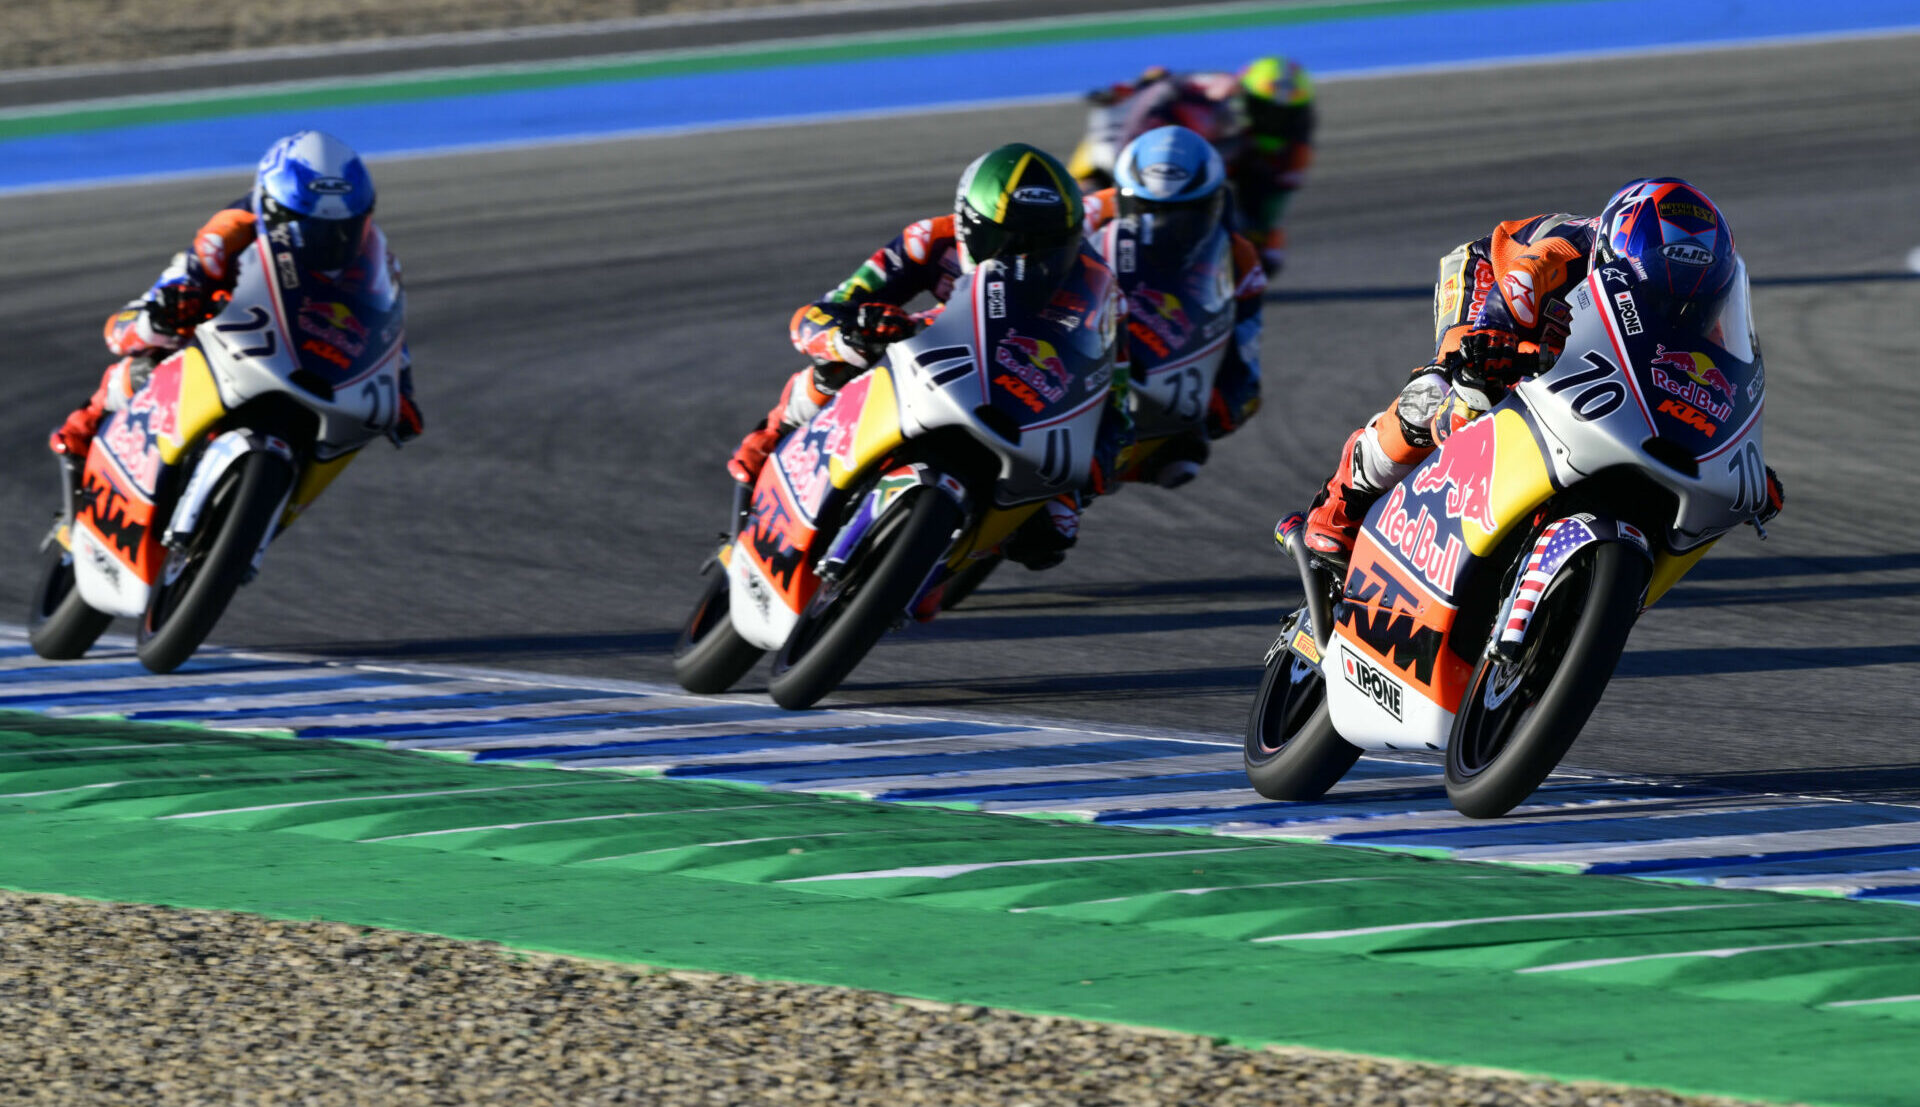 American Kristian Daniel Jr. (70) battles for a top-10 position with Ruche Moodley (11), Rico Salmela (27), and Valentin Perrone (73) at Jerez. Photo courtesy Red Bull.